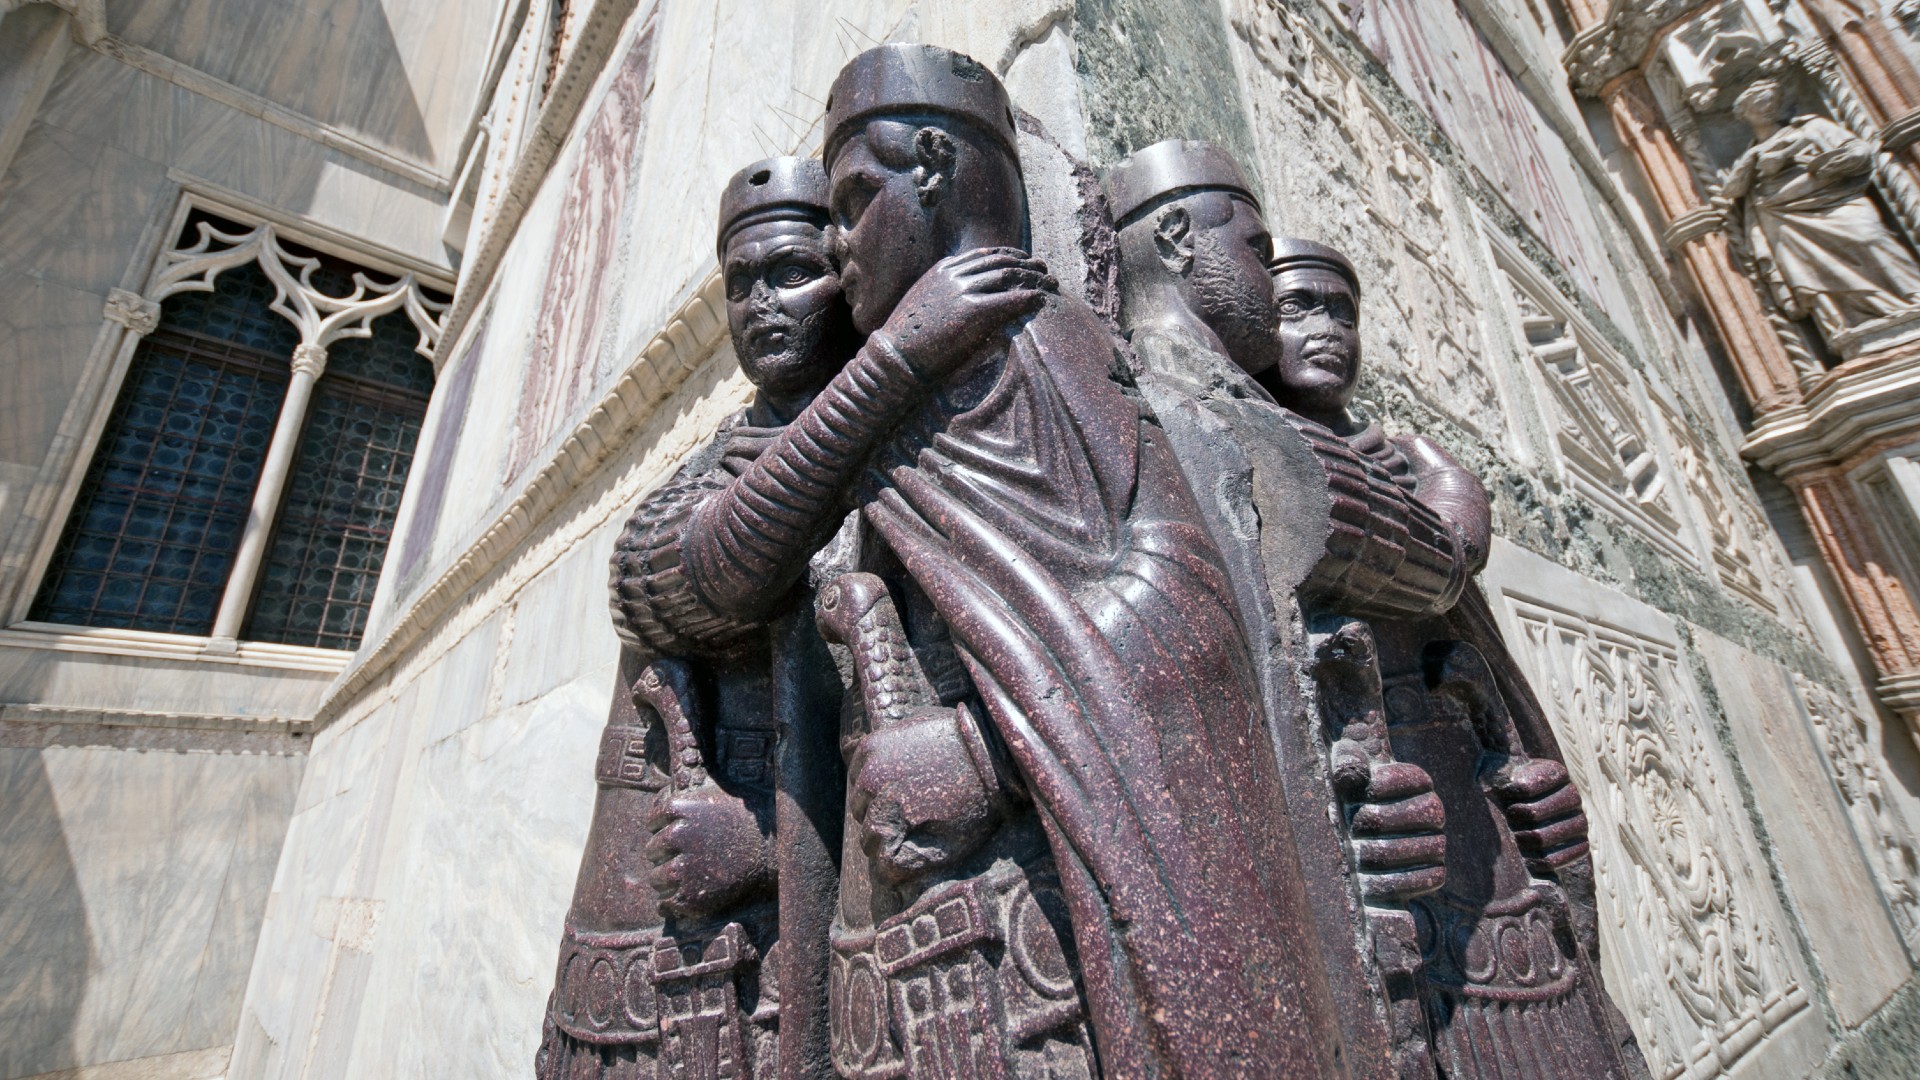 The Portrait of the Four Tetrarchs is a sculpture group of four Roman emperors, wedged into a corner on the facade of San Marco in Venice, Italy.